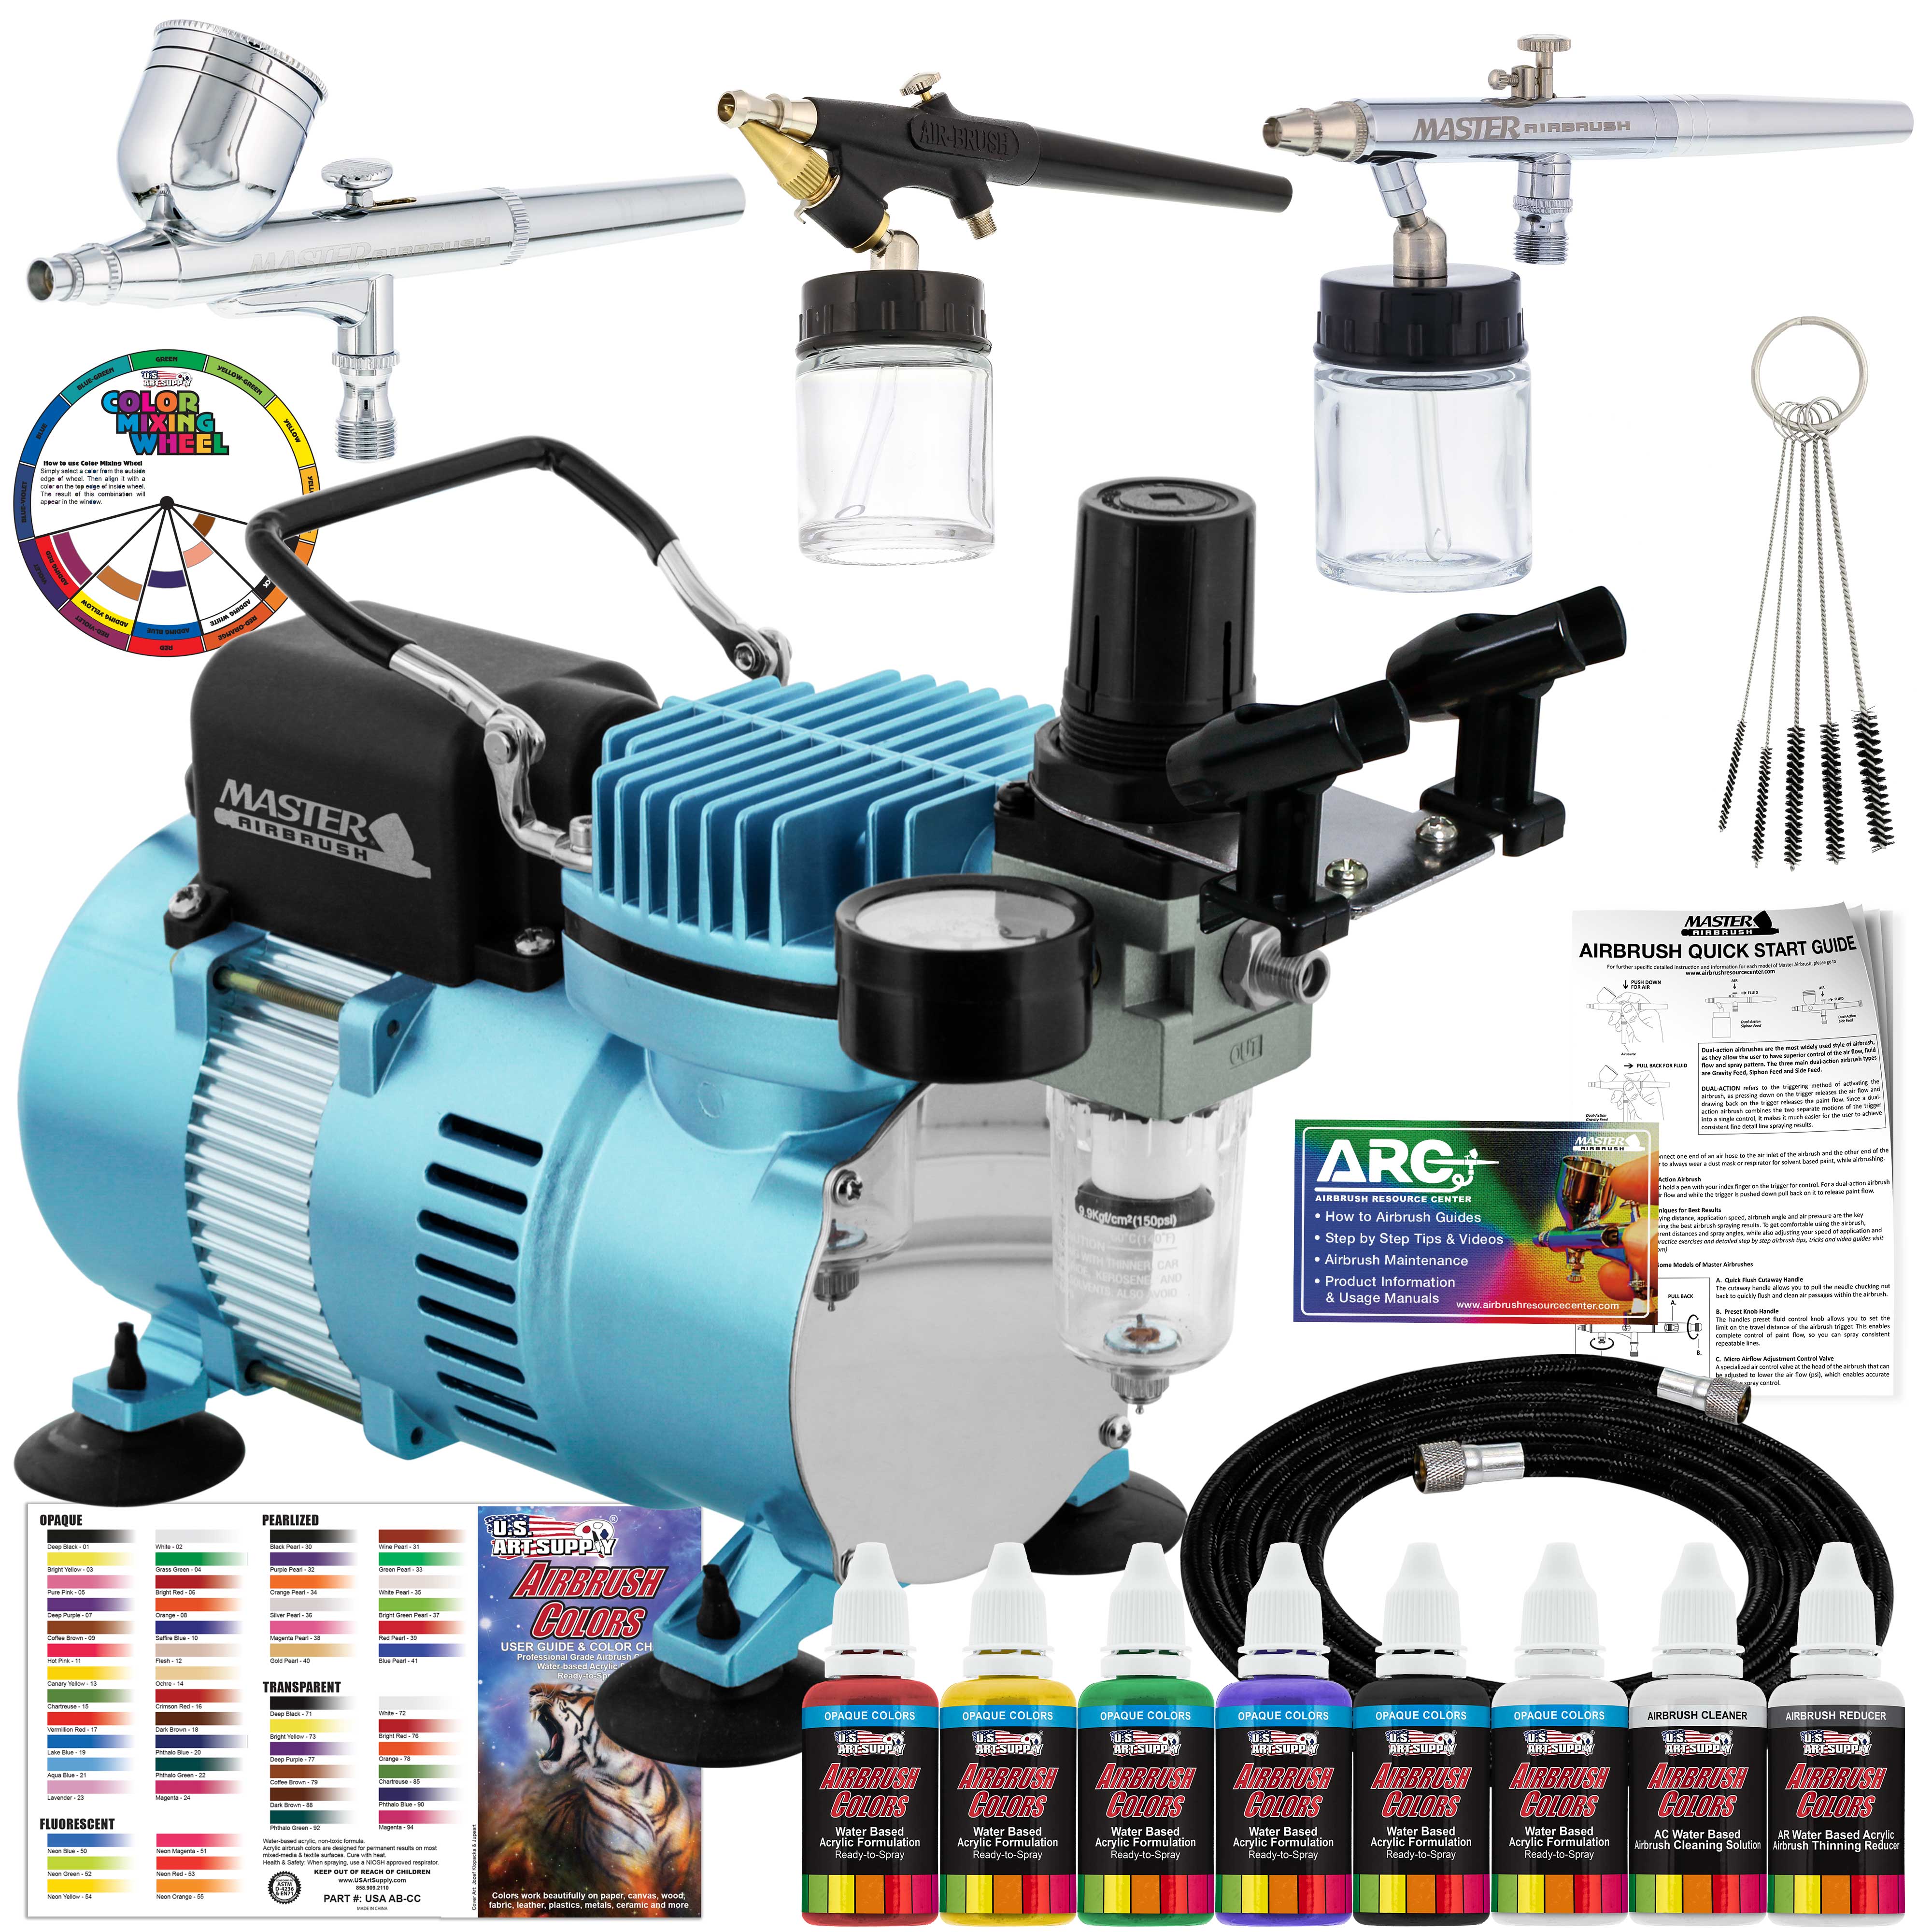 New 3 Airbrush Kit 6 Primary Colors Air Compressor Dual-Action Color Wheel Set - image 1 of 7